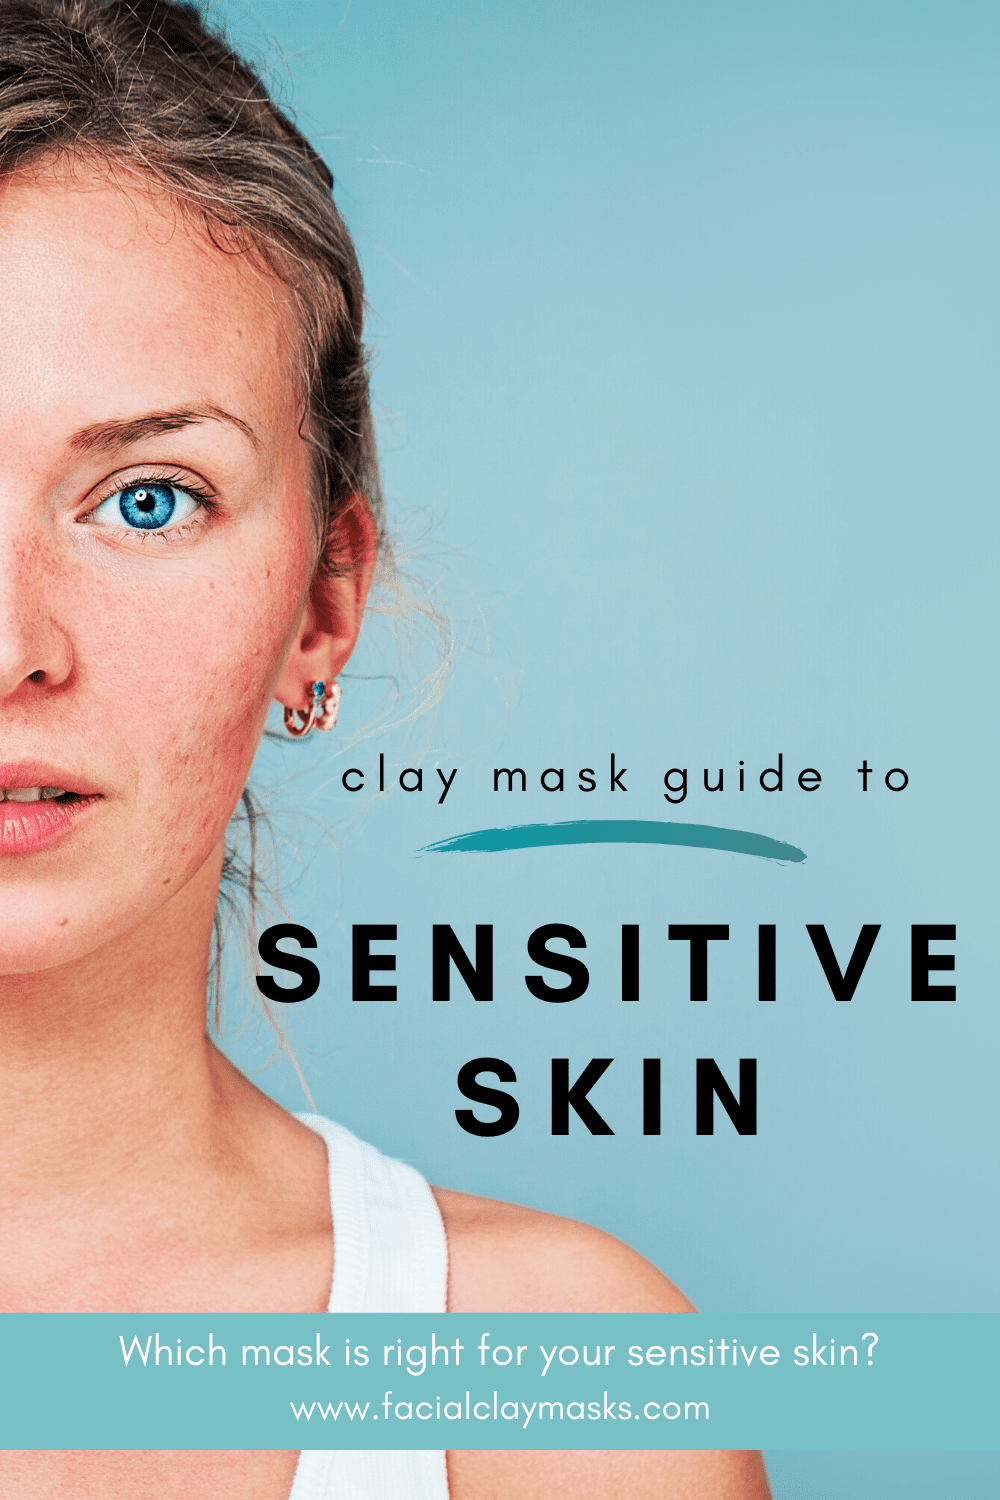 Are Clay Masks good for Sensitive Skin? 1